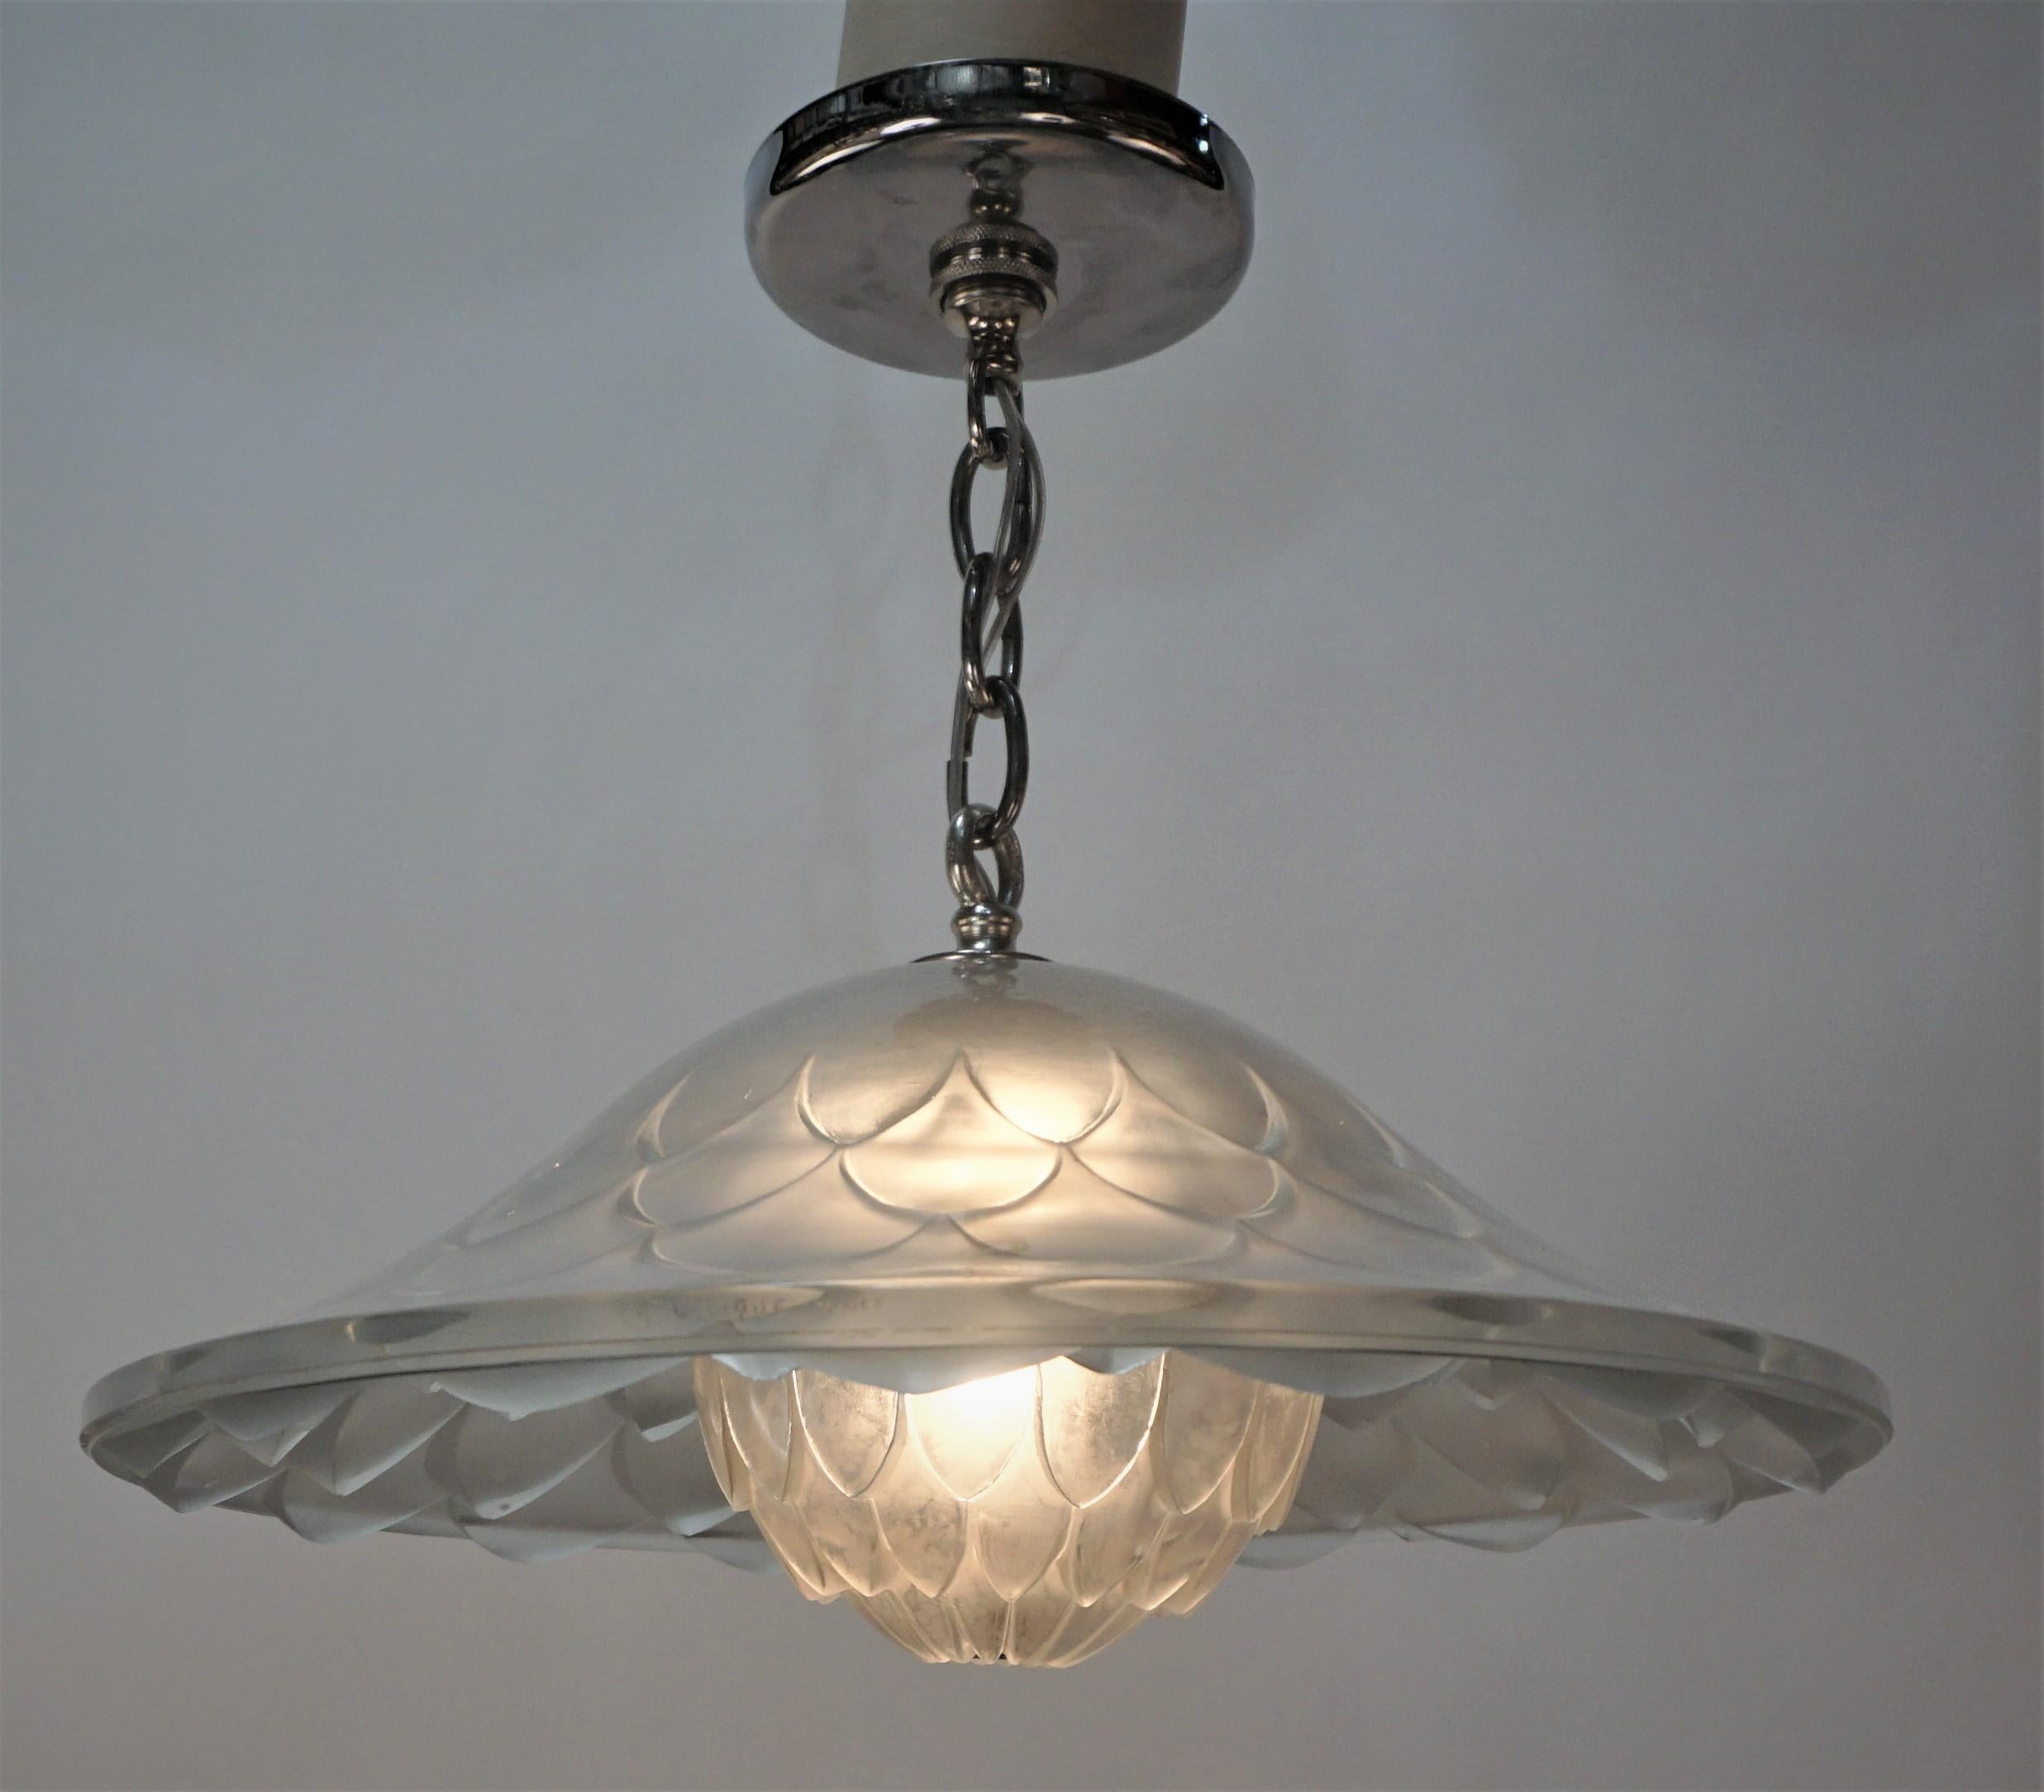 Clear frost glass in a shape of Dahlia with nickel on bronze hardware semi flush chandelier.
Maked Rene Lalique.